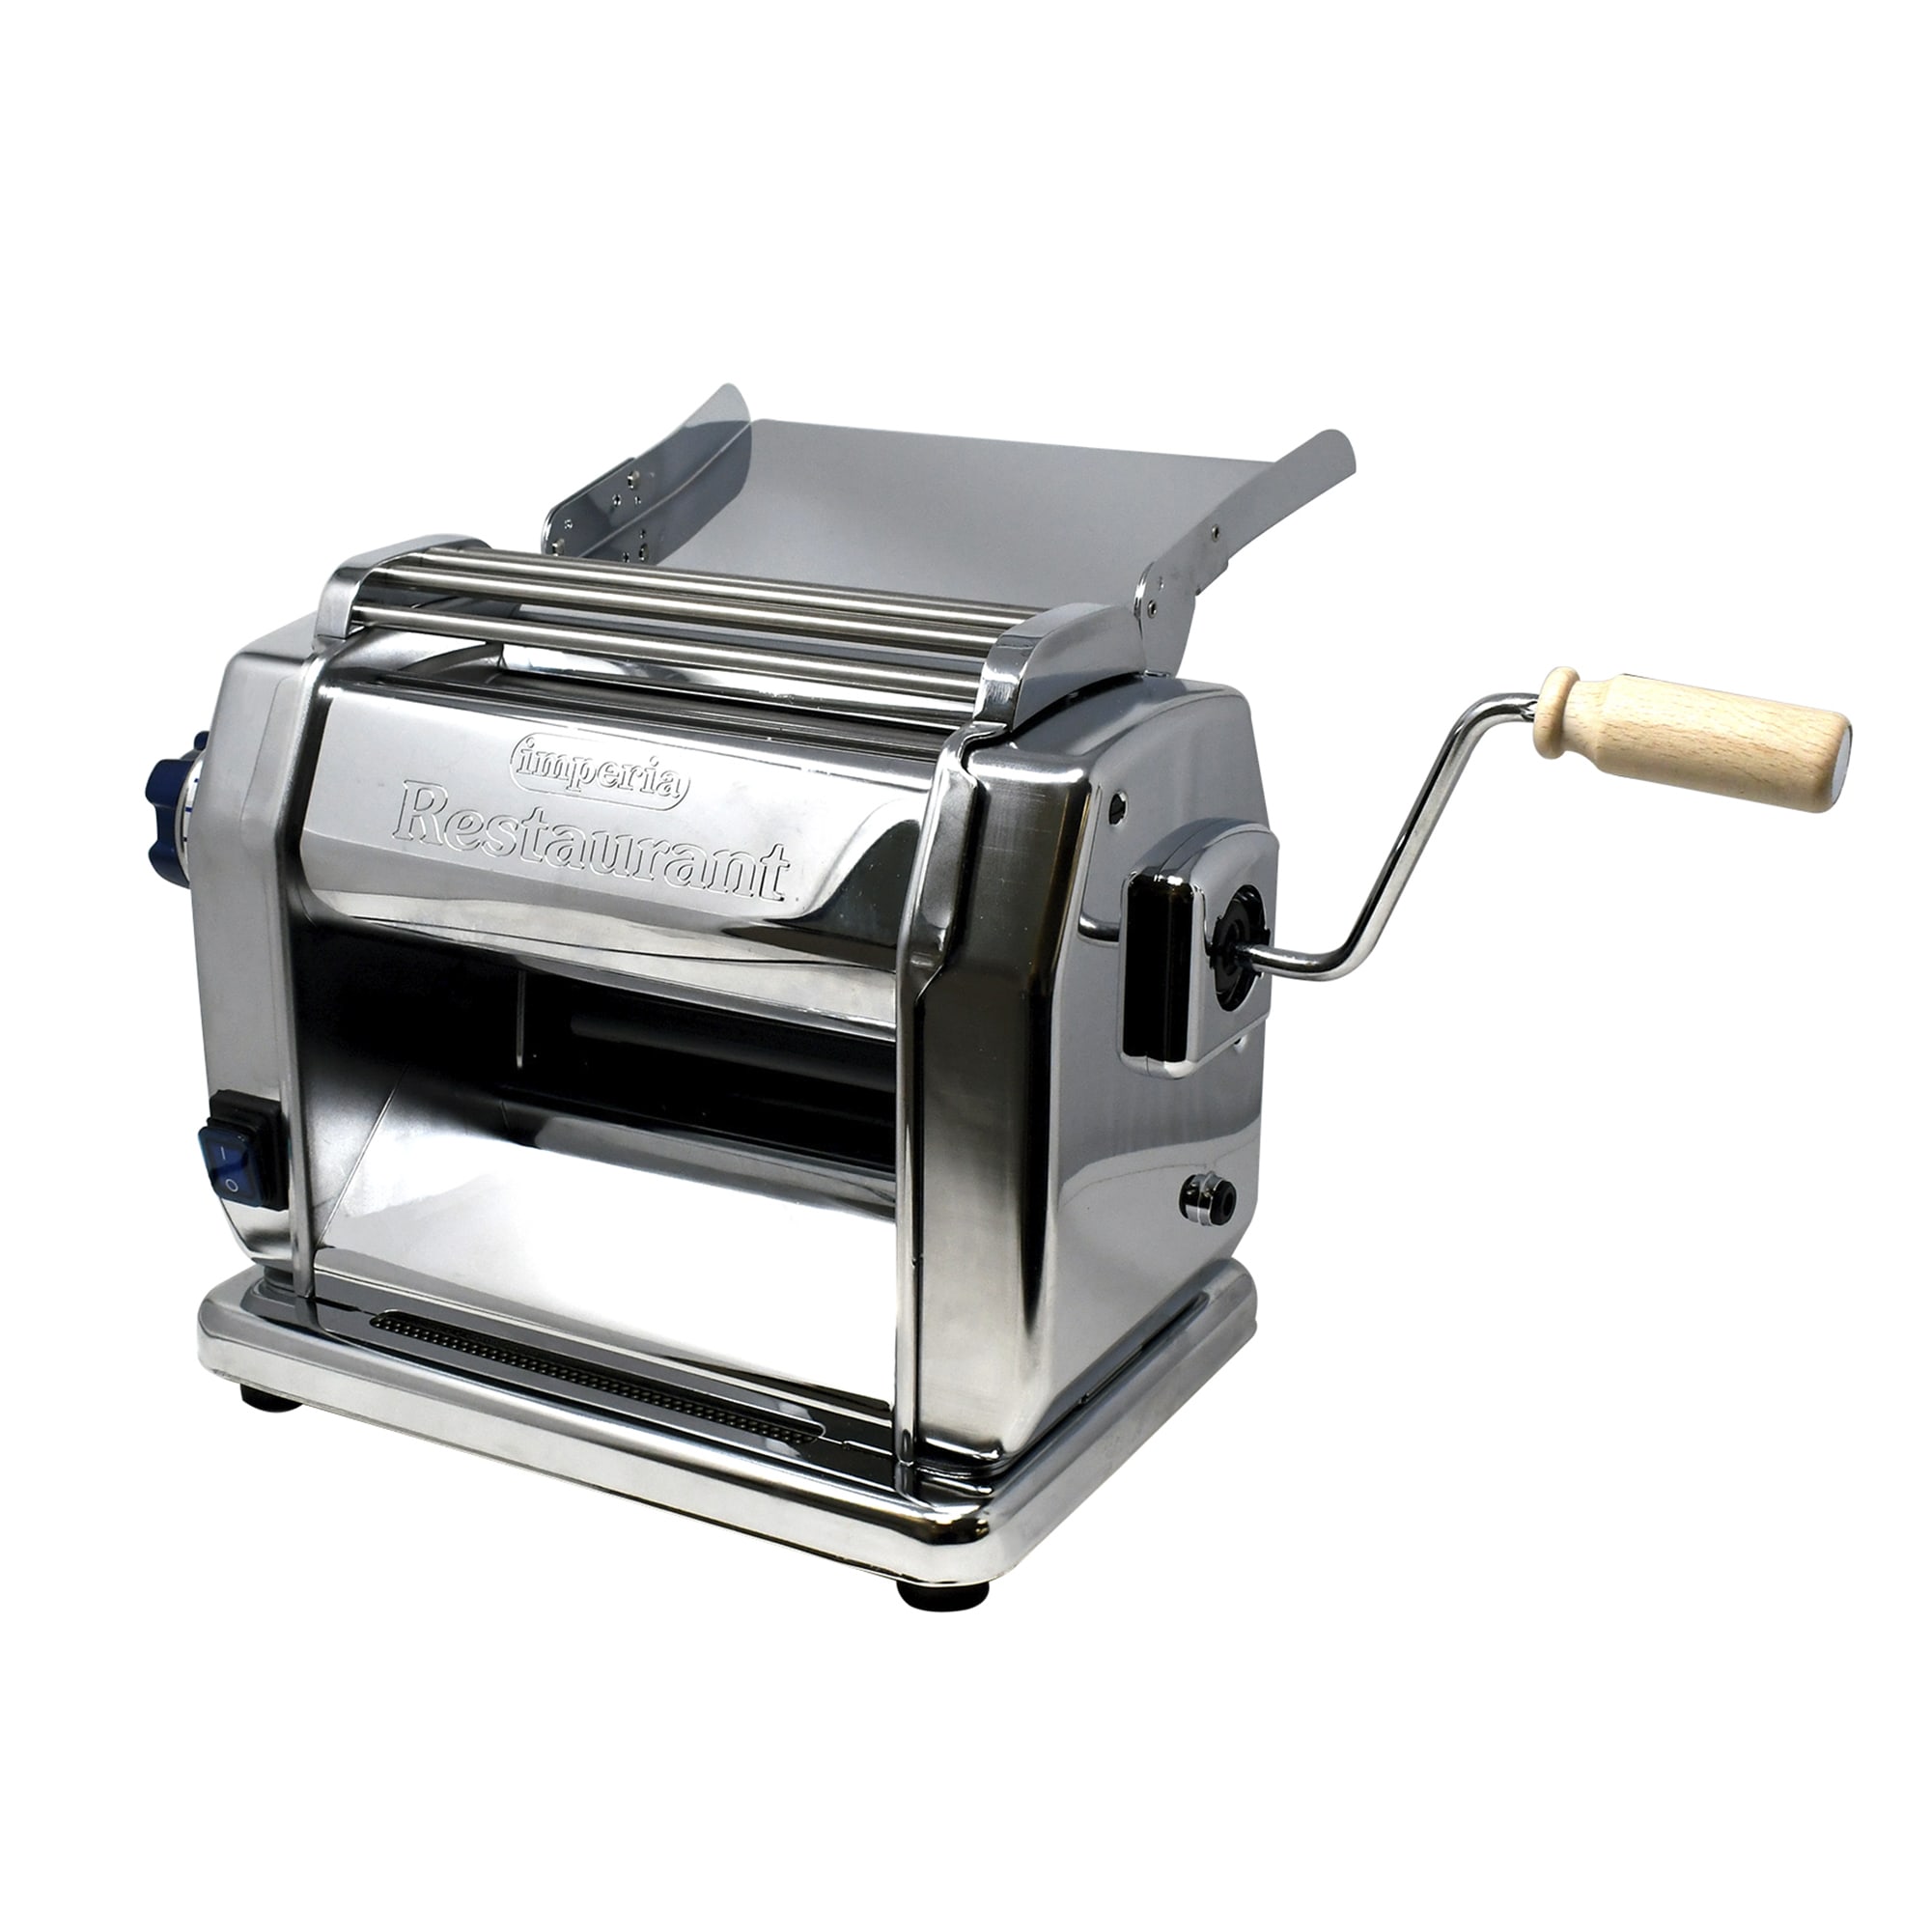 Imperia 13234 Electric Pasta Sheeter w/ 1 9/10 mm Roller Opening, 120v